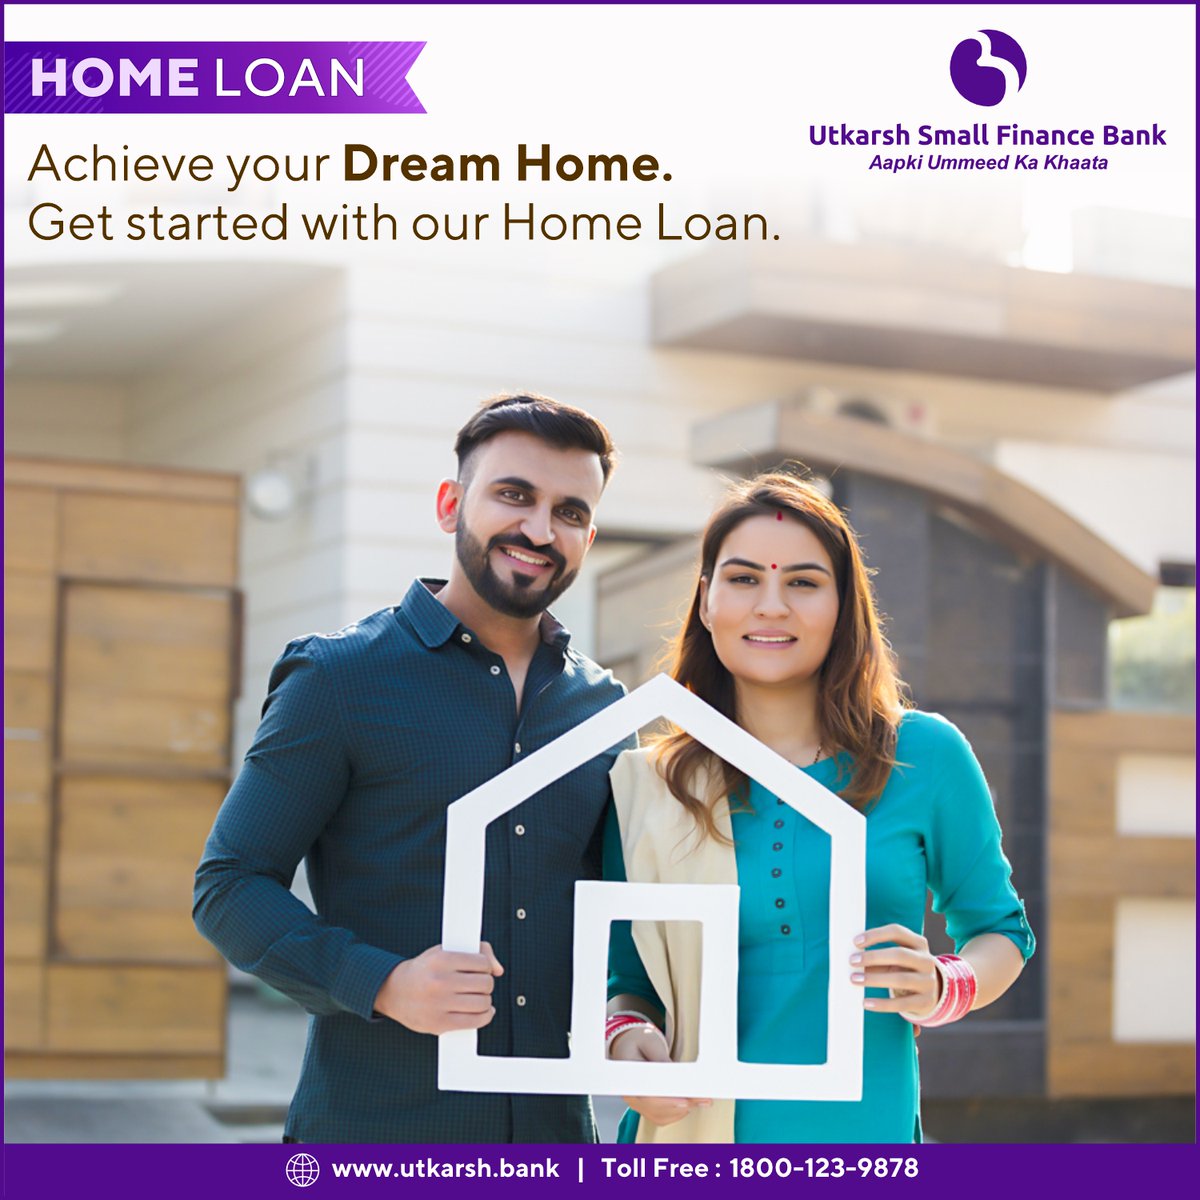 Bringing your dream home within reach. Our Home Loans offer the foundation for a life filled with comfort and joy. #HomeLoans #BFSI #Utkarshsmallfinancebank